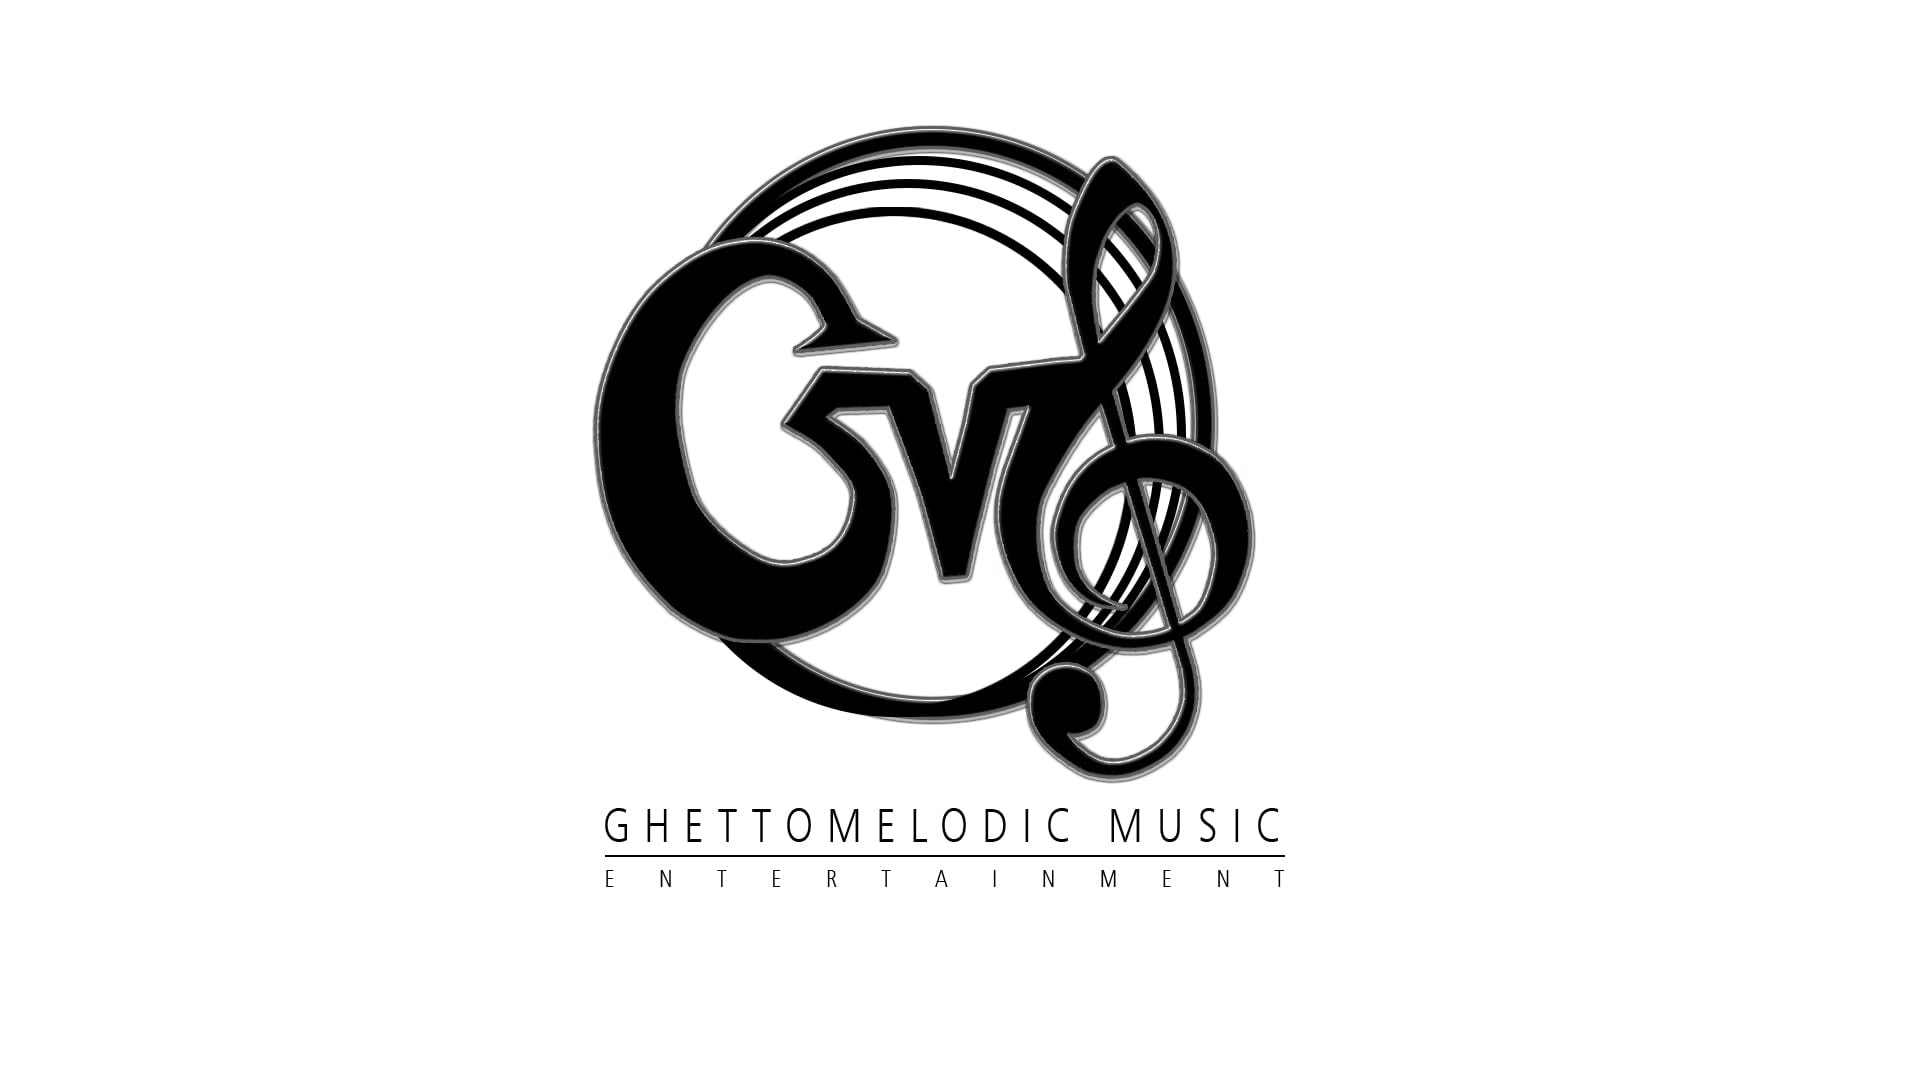 Ghettomelodic Music